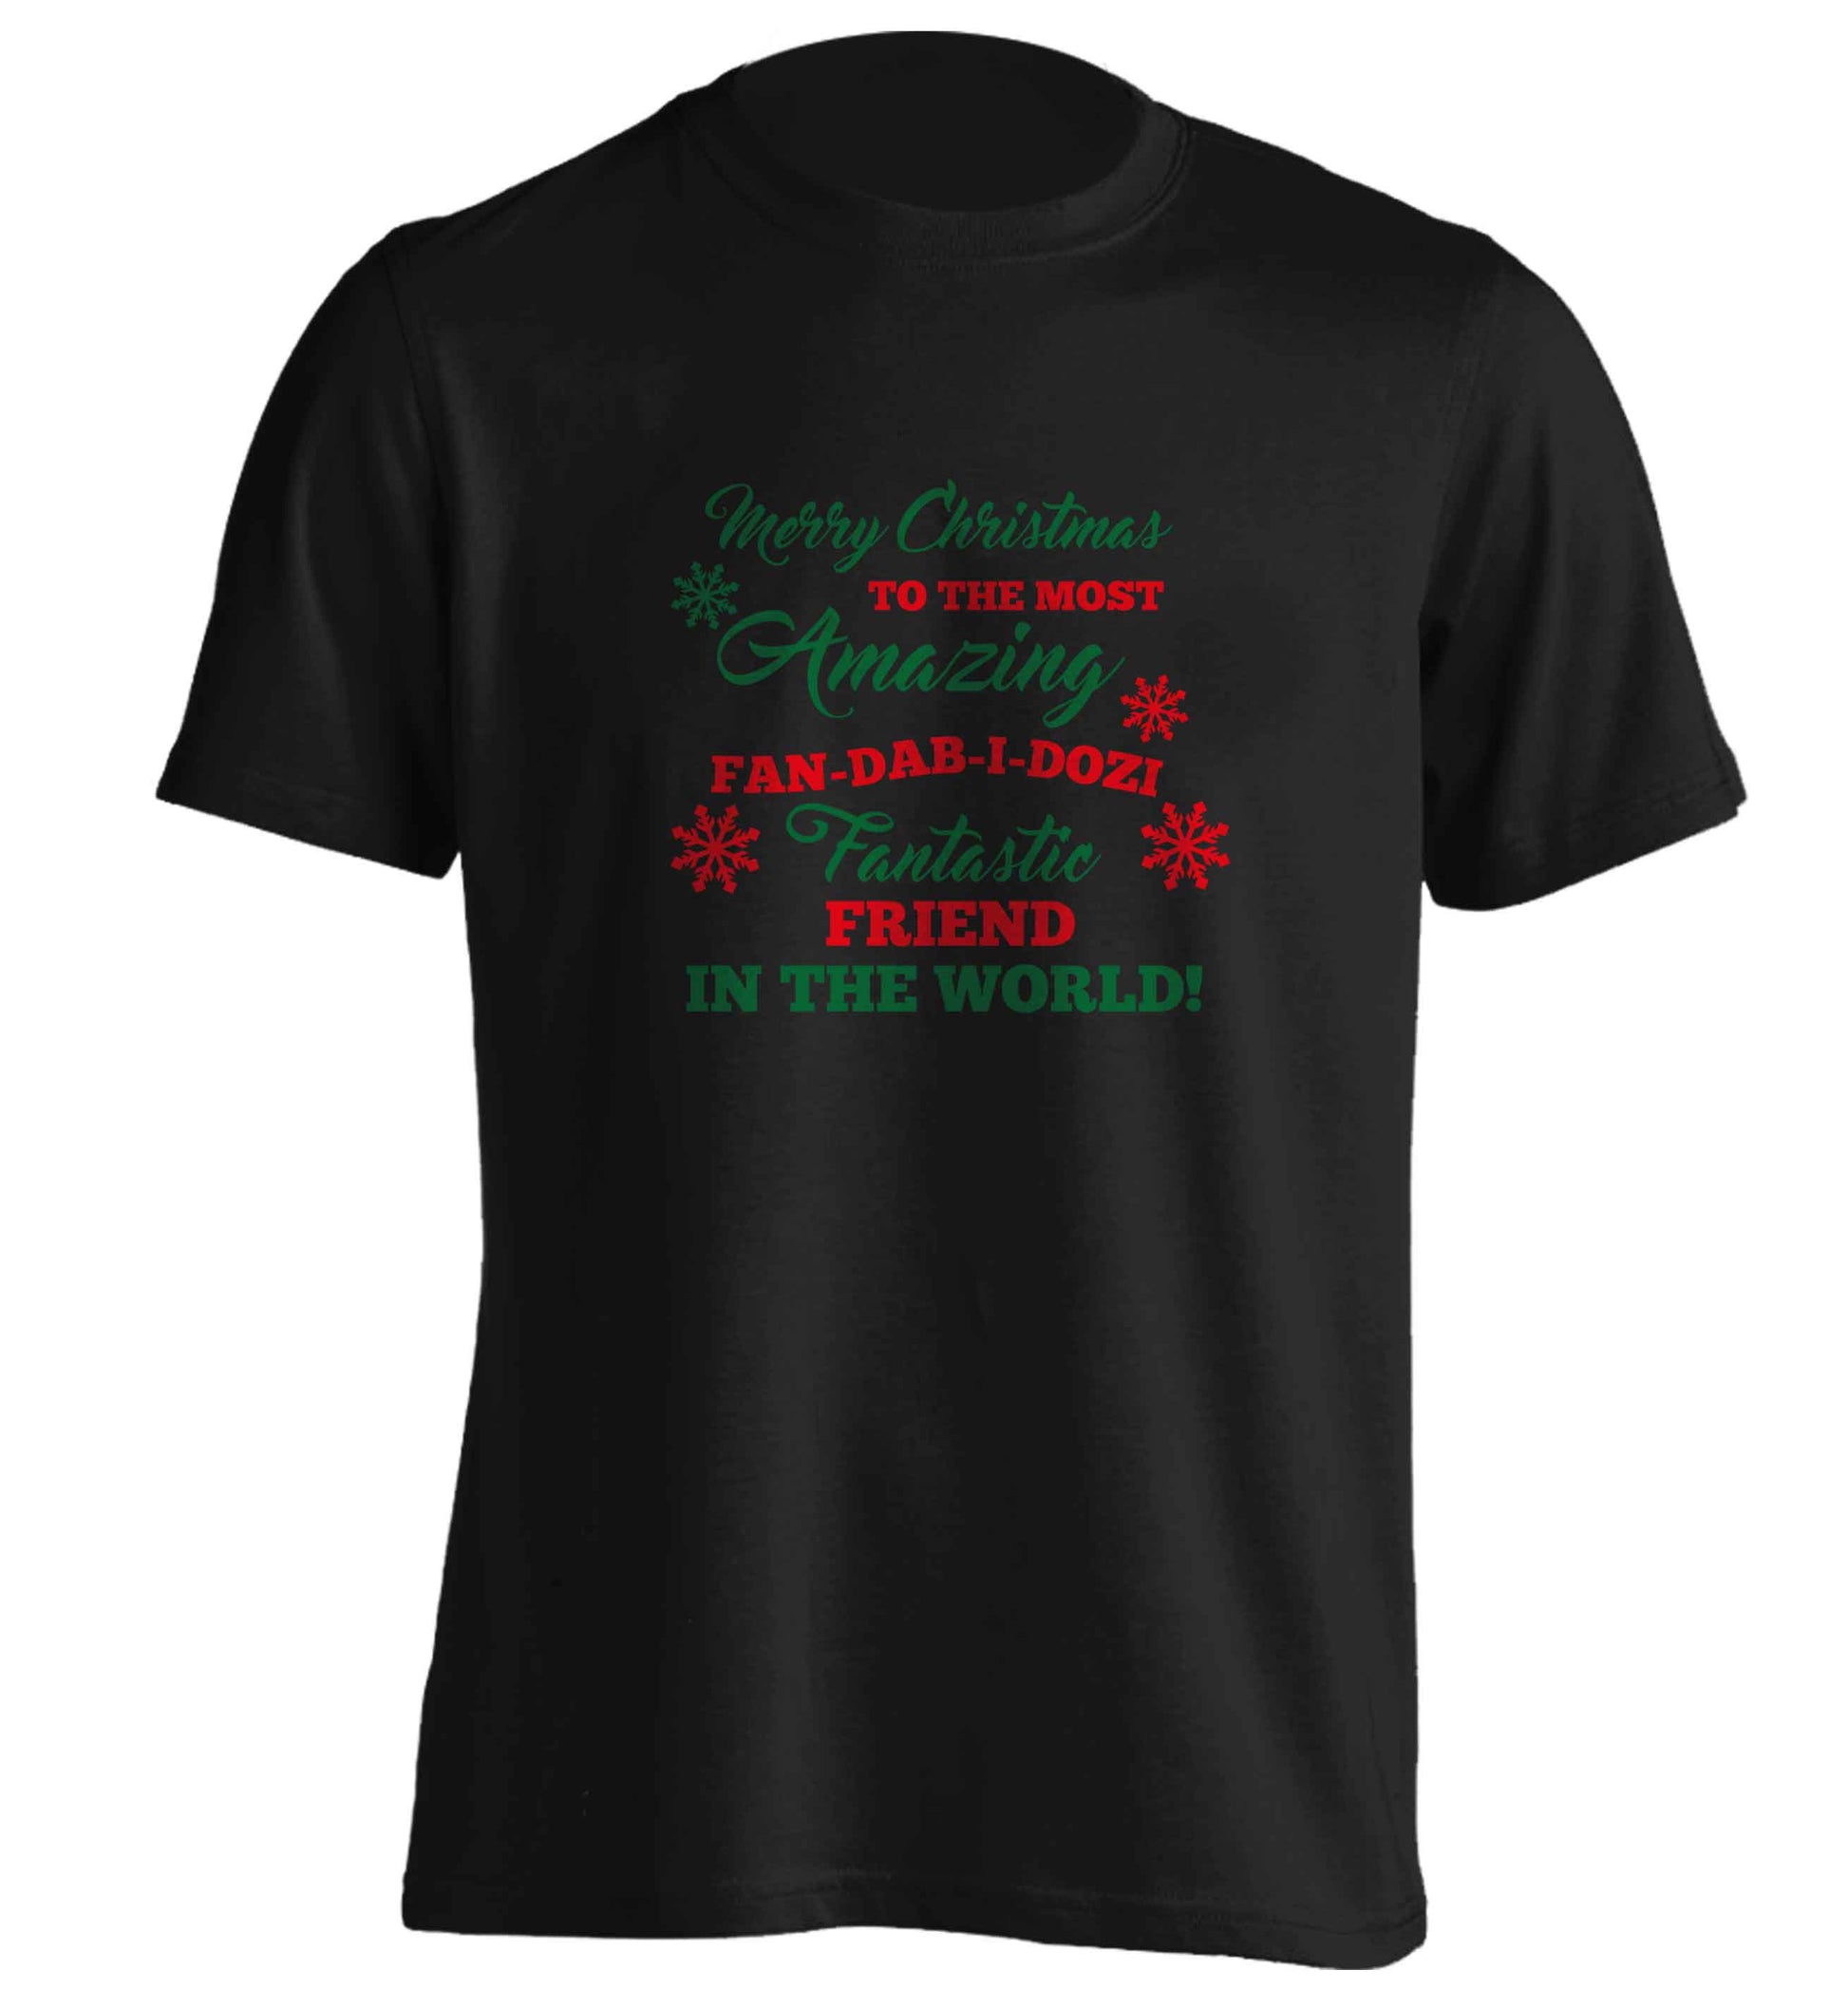 Merry Christmas to the most amazing fan-dab-i-dozi fantasic friend in the world adults unisex black Tshirt 2XL